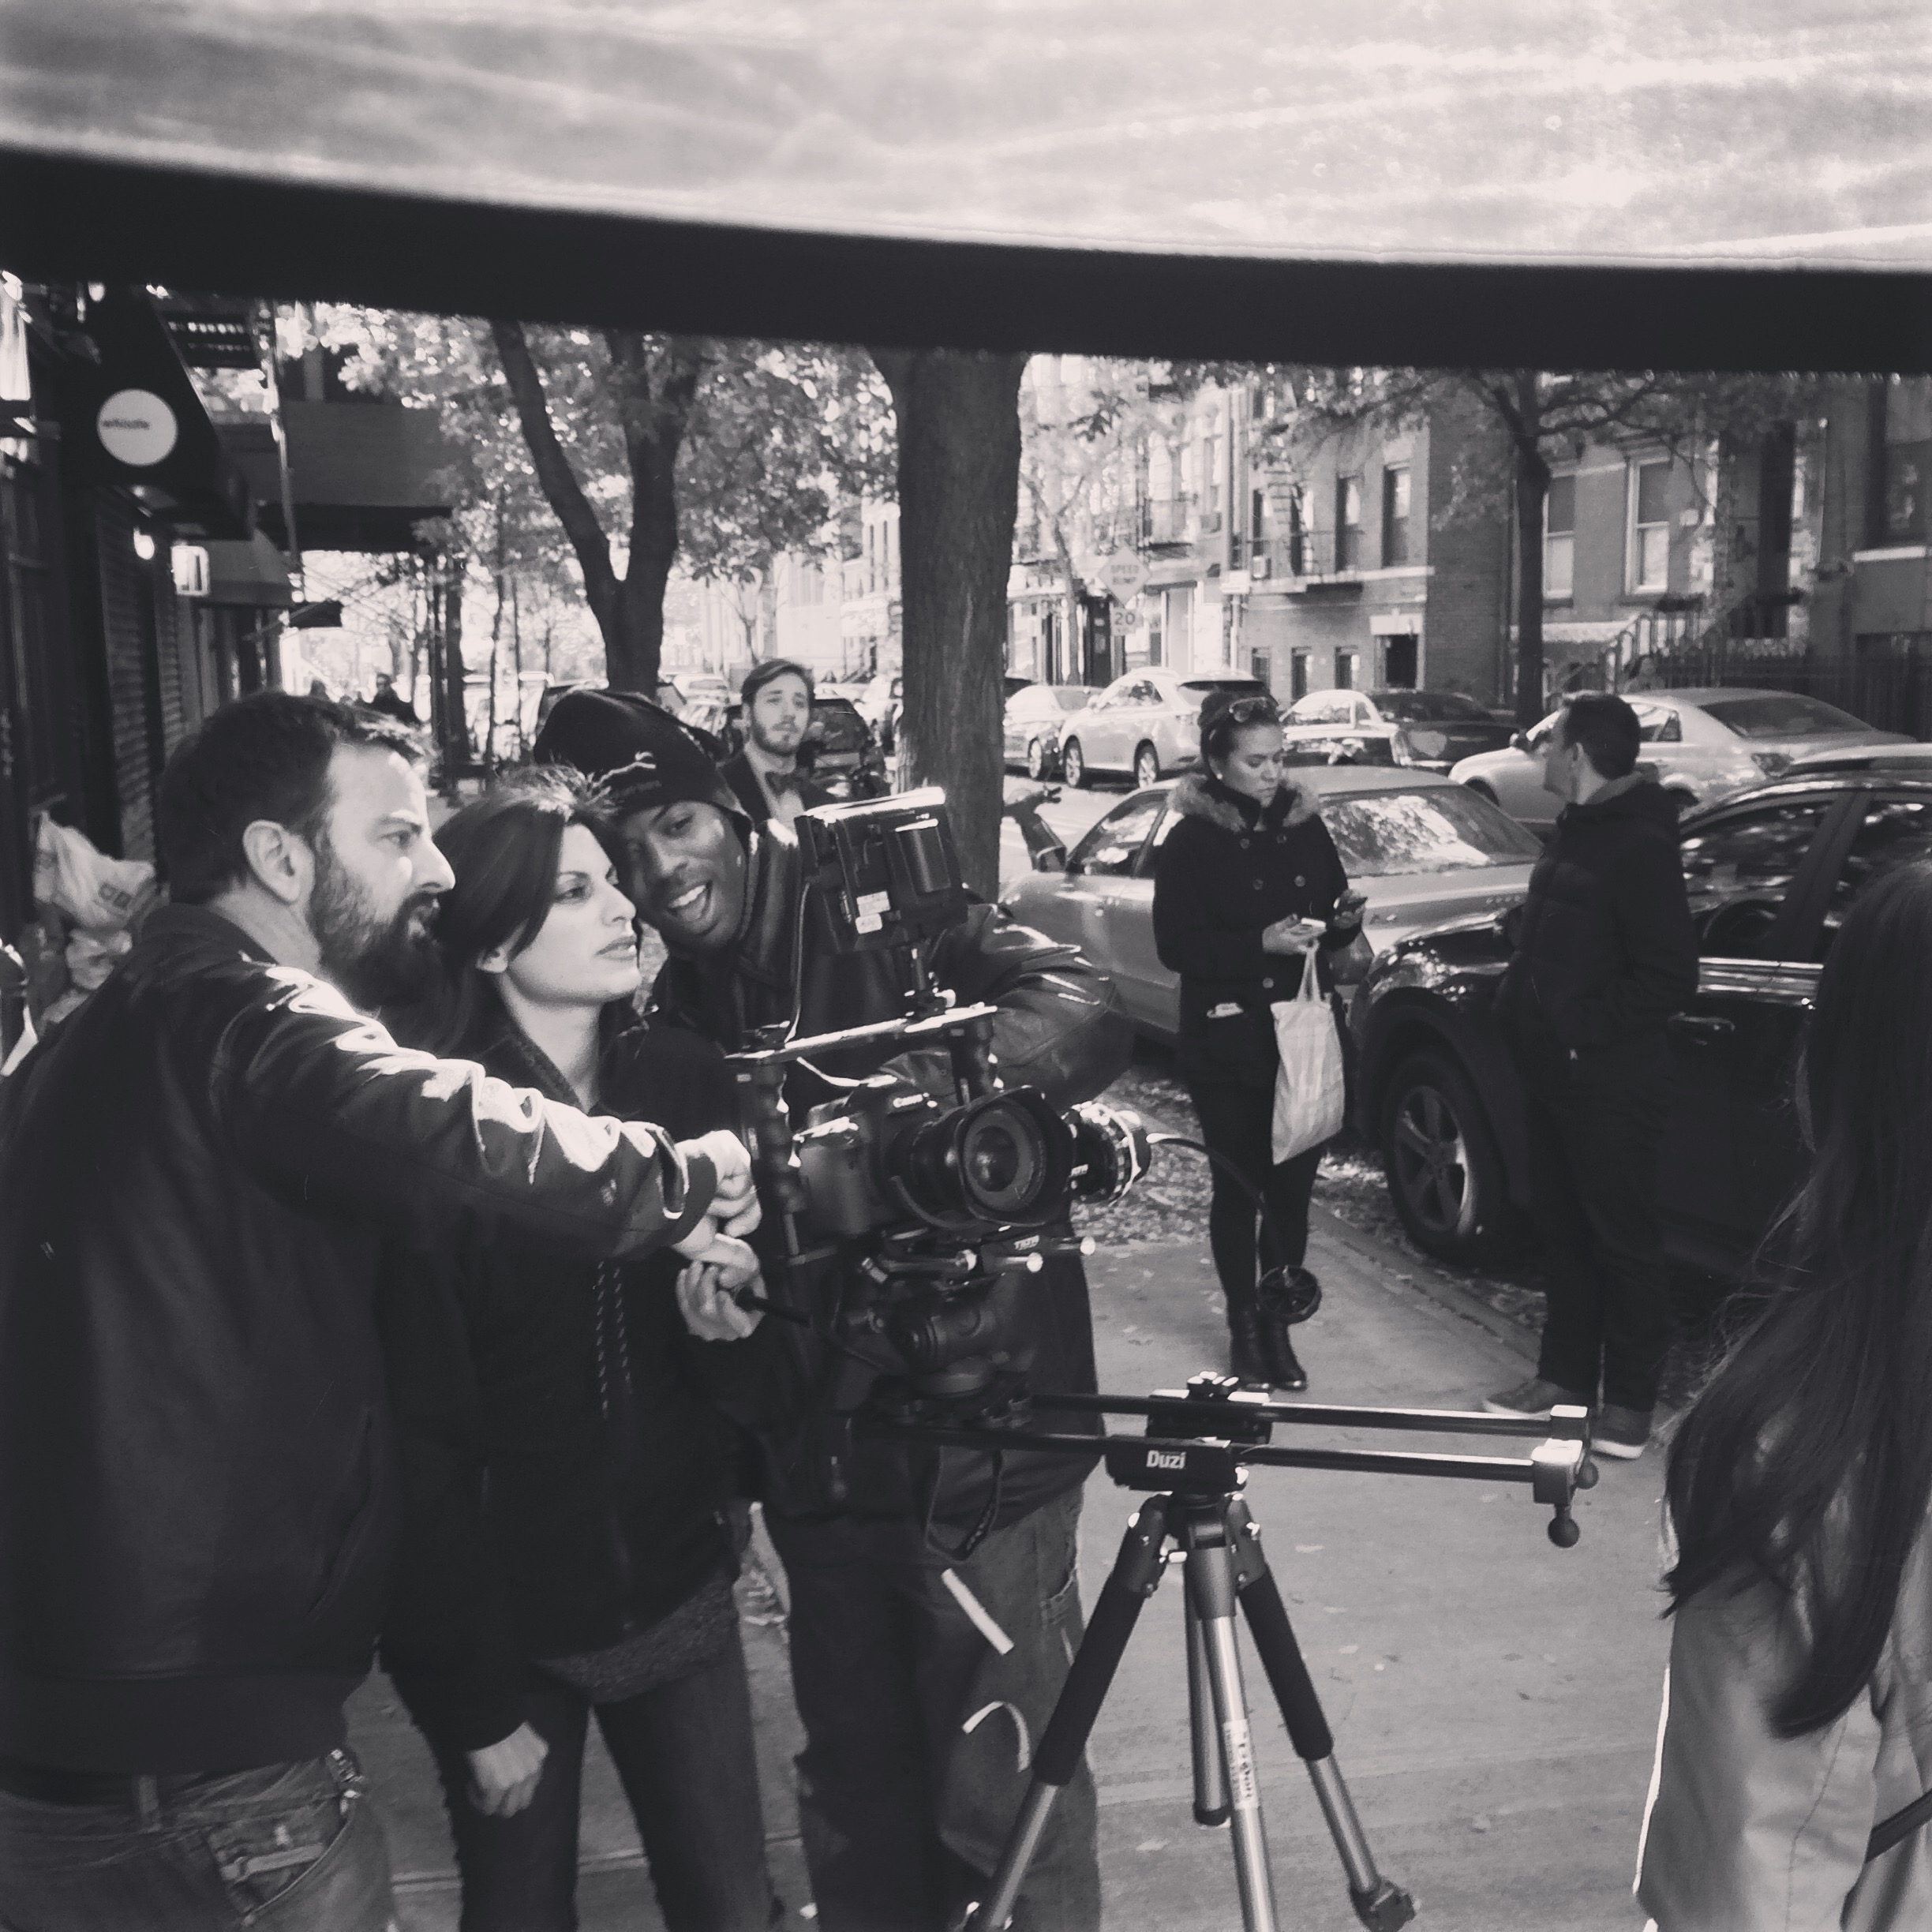 Shooting Fate2Love in New York on November 2015